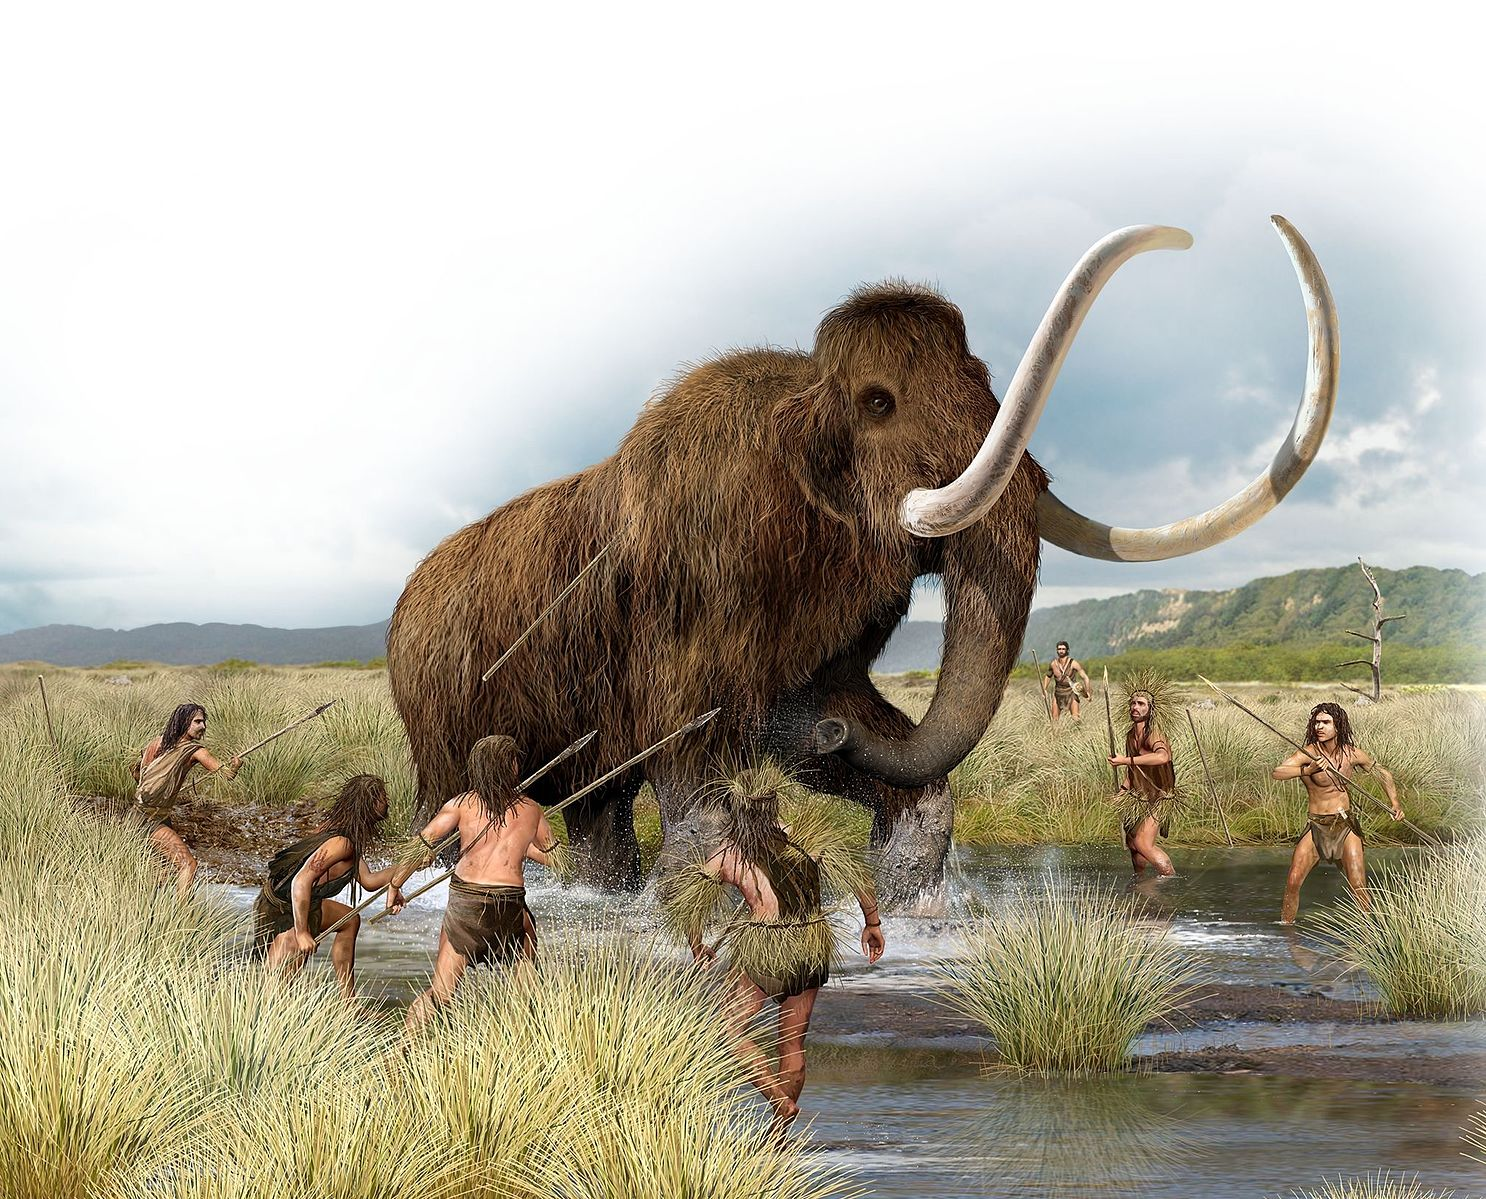 Image of a mammoth being hunted by people using spears